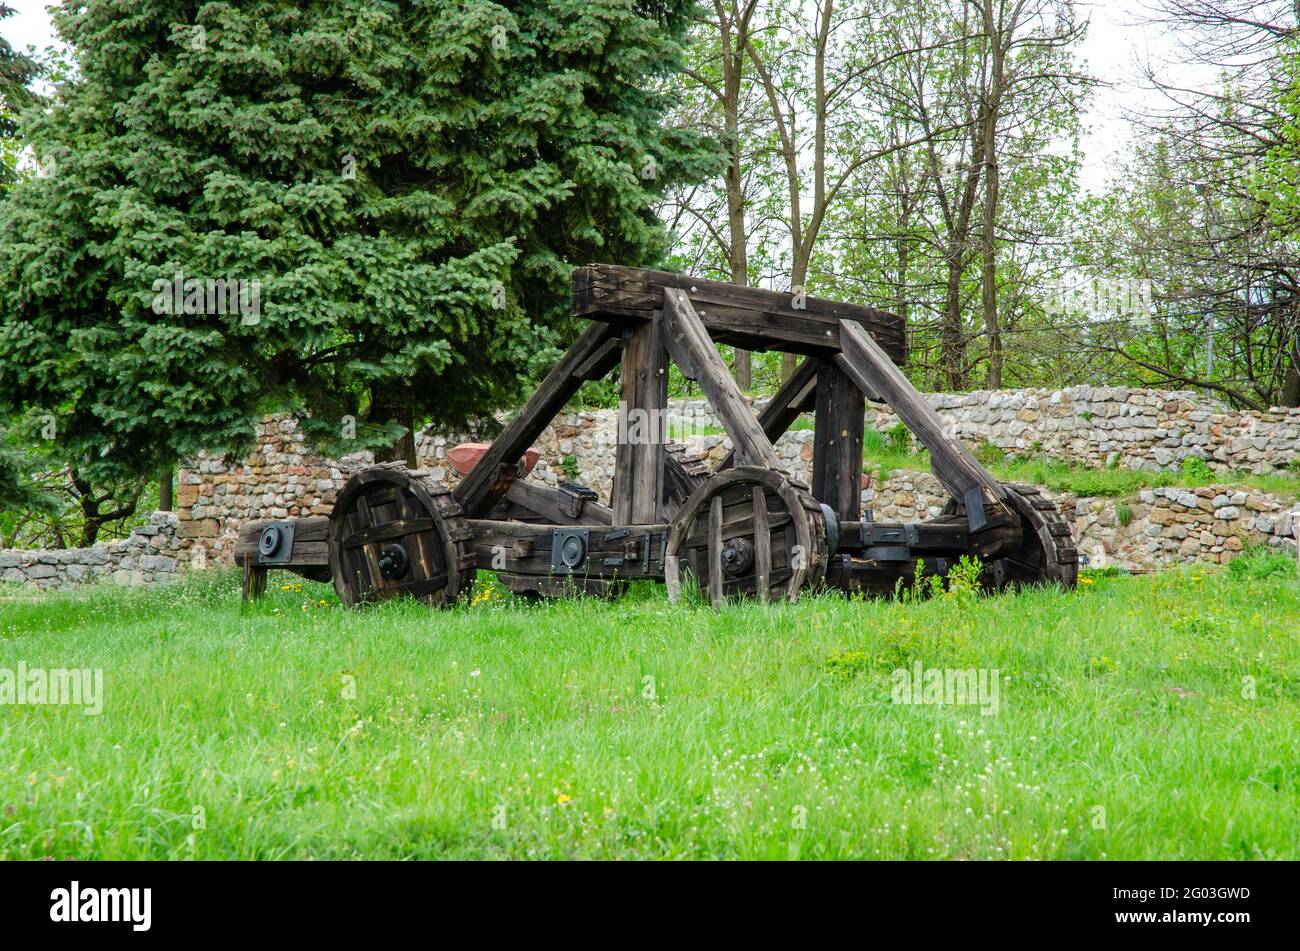 Replica of an ancient wooden catapult located in the Krakra fortress, near Pernik, Bulgaria. Stock Photo